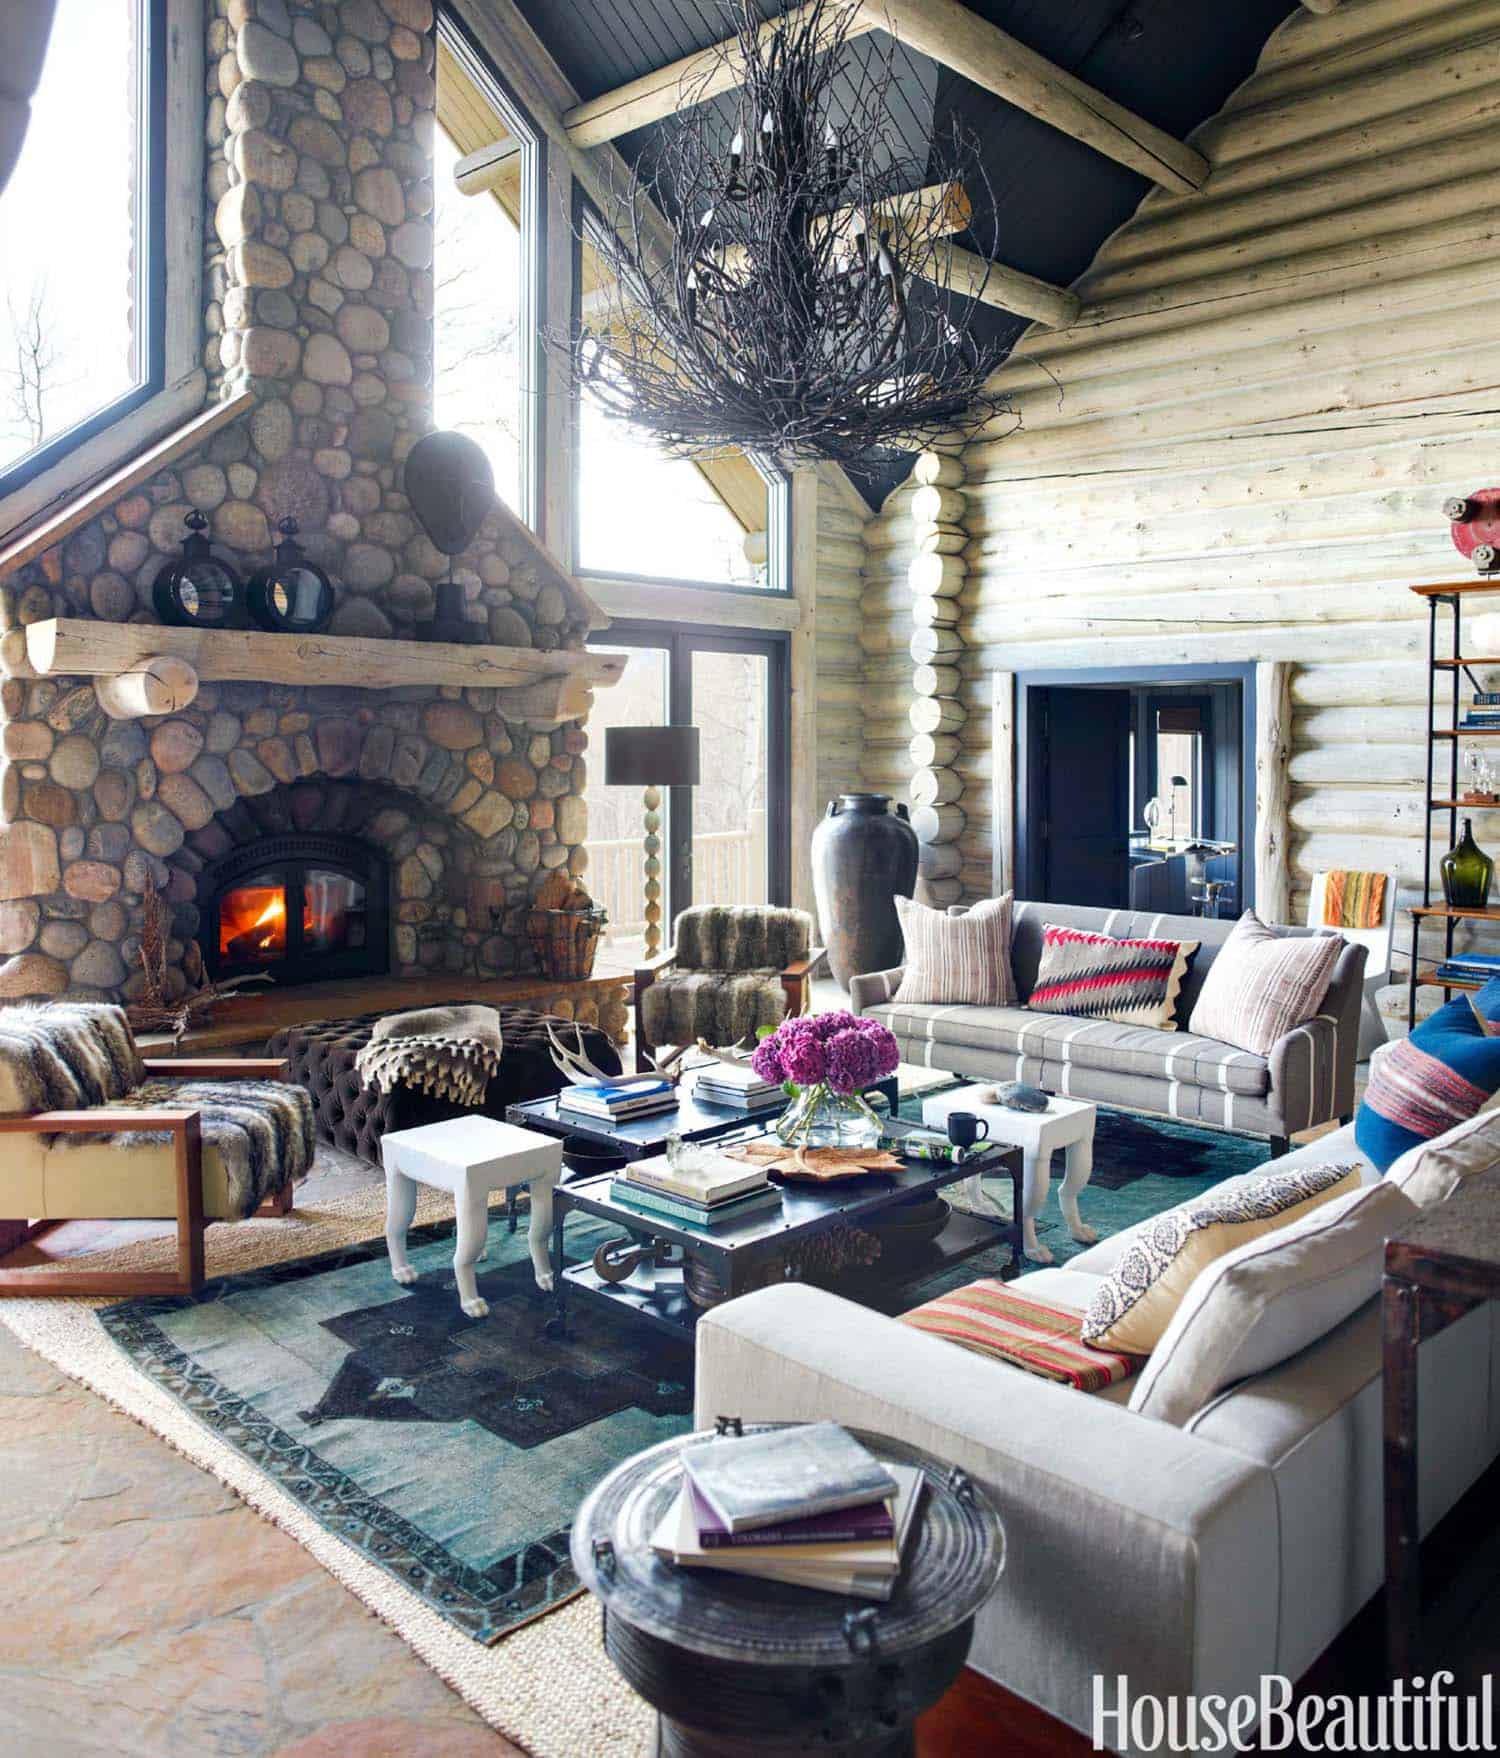 Ultra-cozy rustic log cabin nestled in the Rocky Mountains